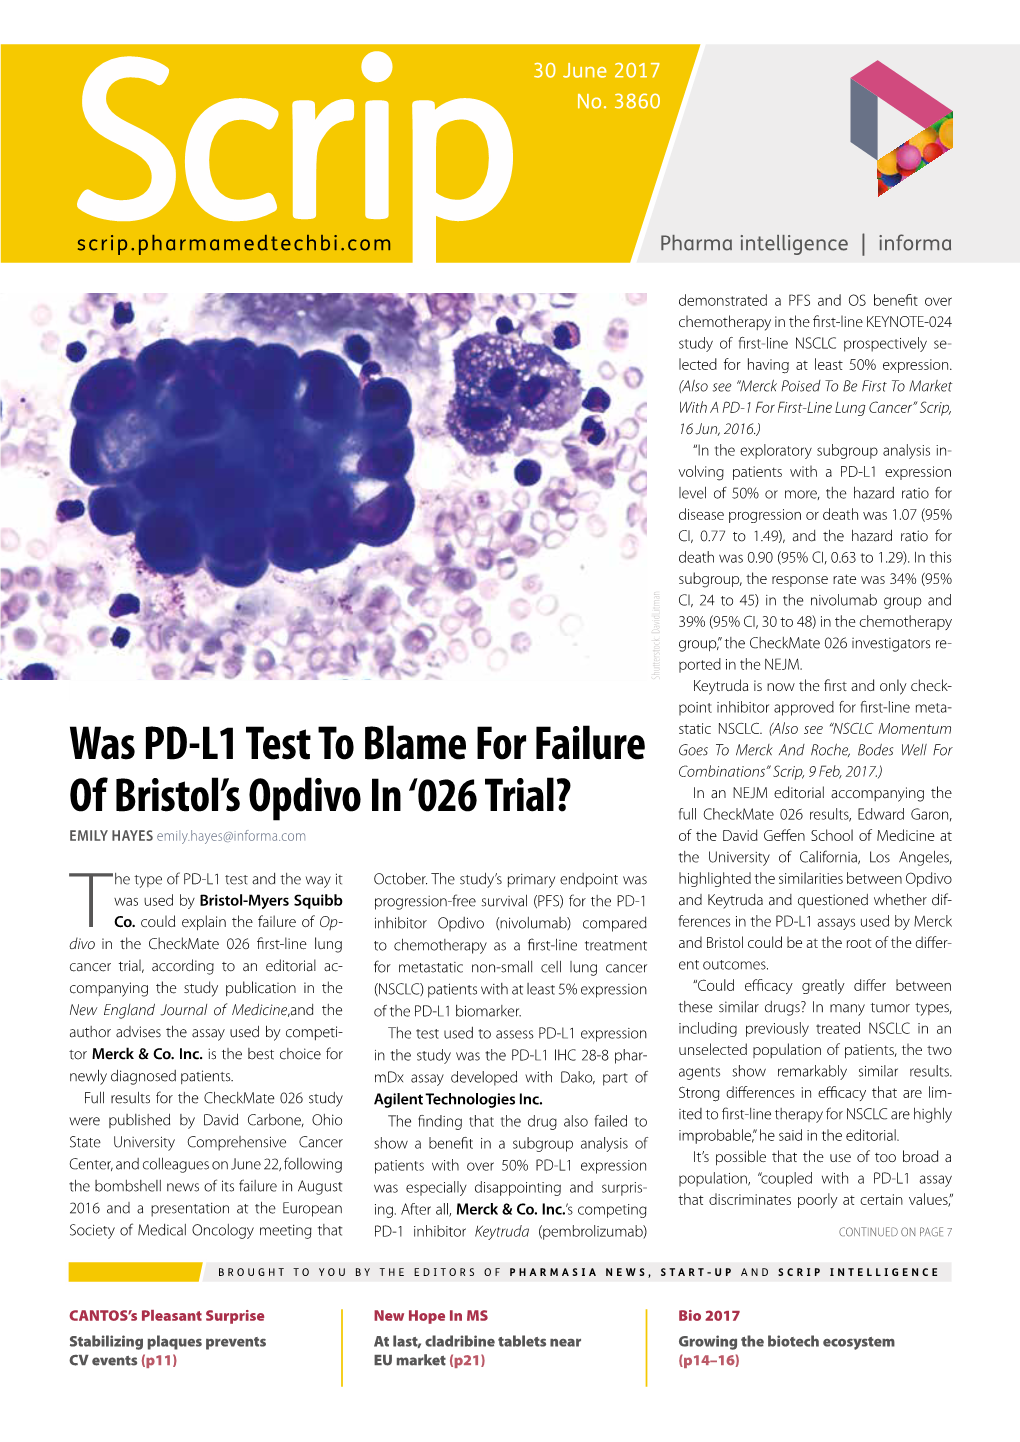 Was PD-L1 Test to Blame for Failure of Bristol's